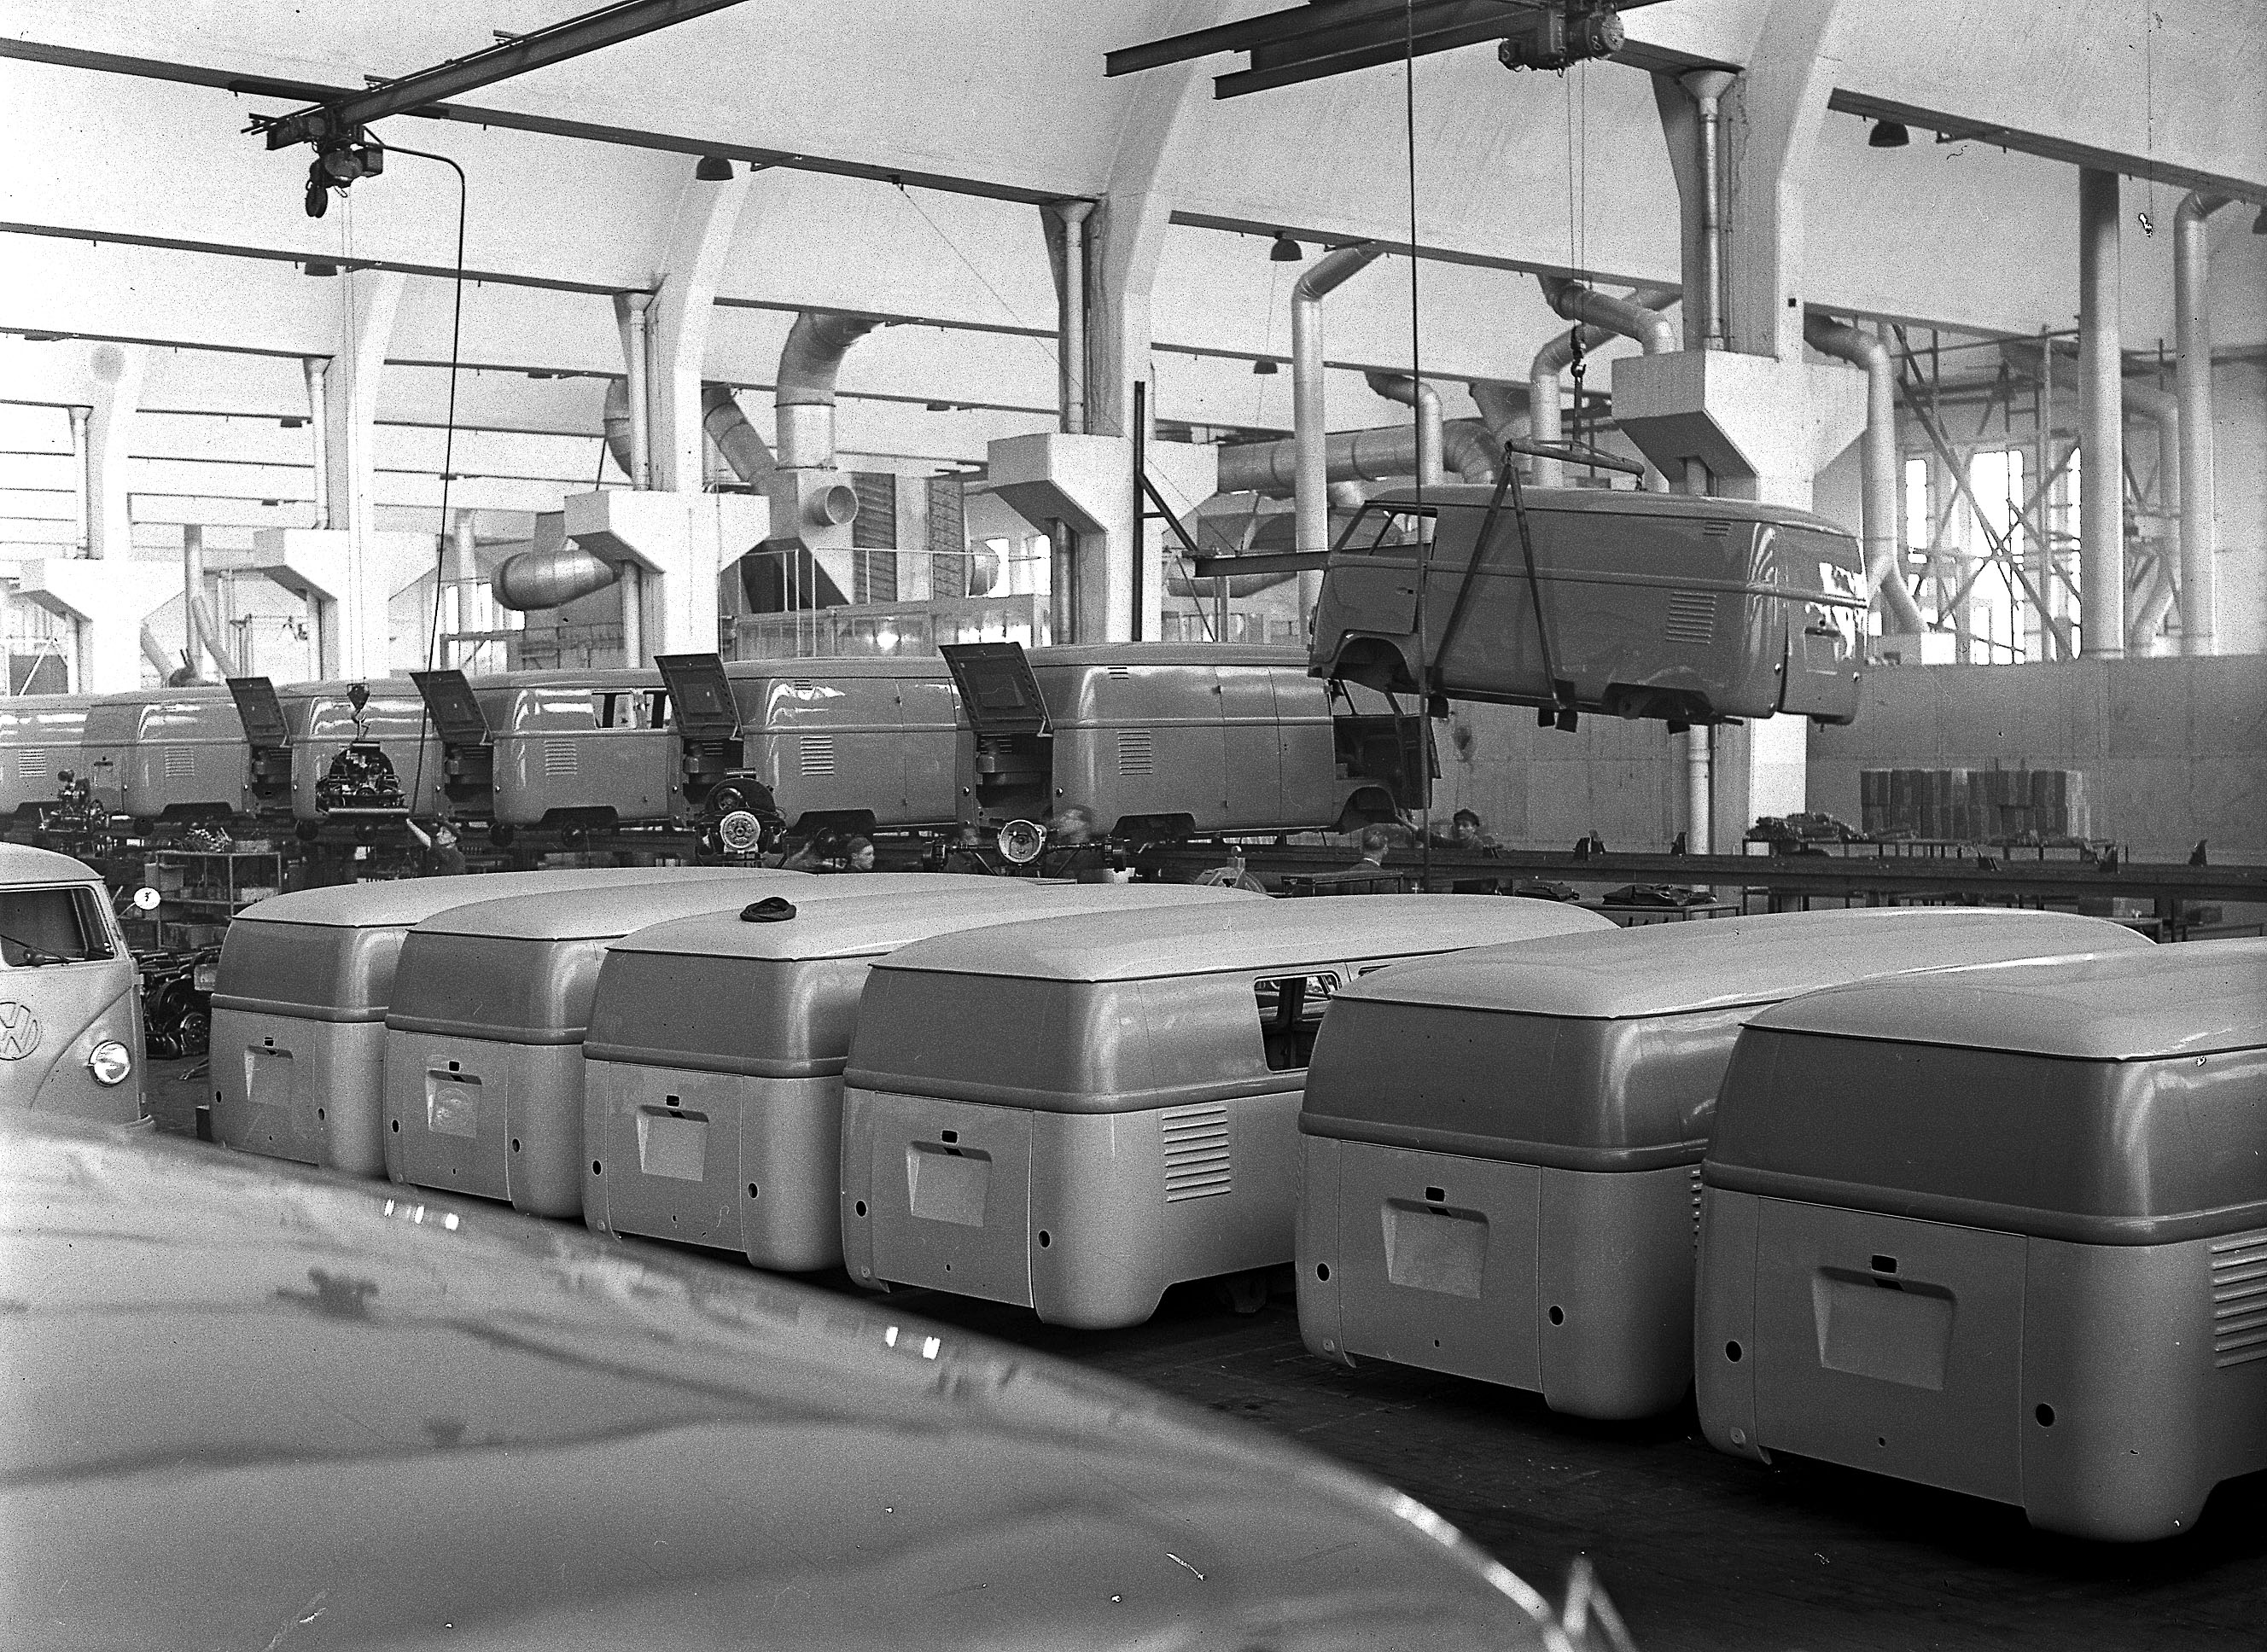 Transporter Production At Wolfsburg 1950's